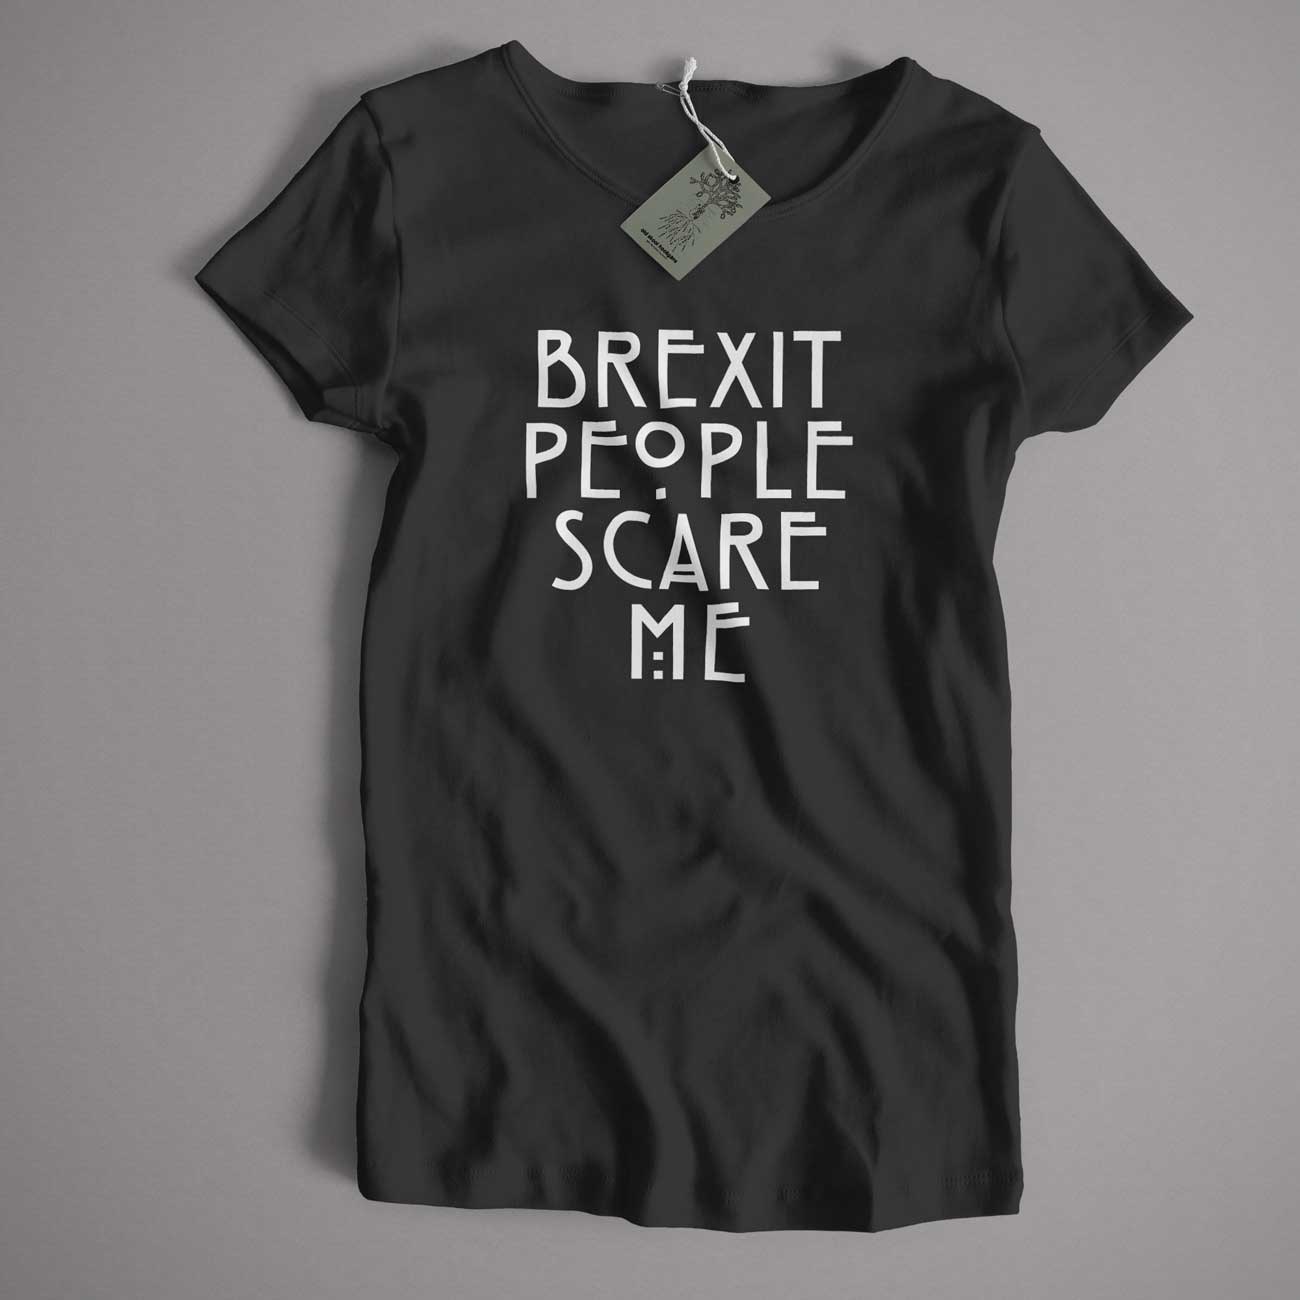 Brexit People Scare Me T Shirt - A Remainer T Shirt Design From